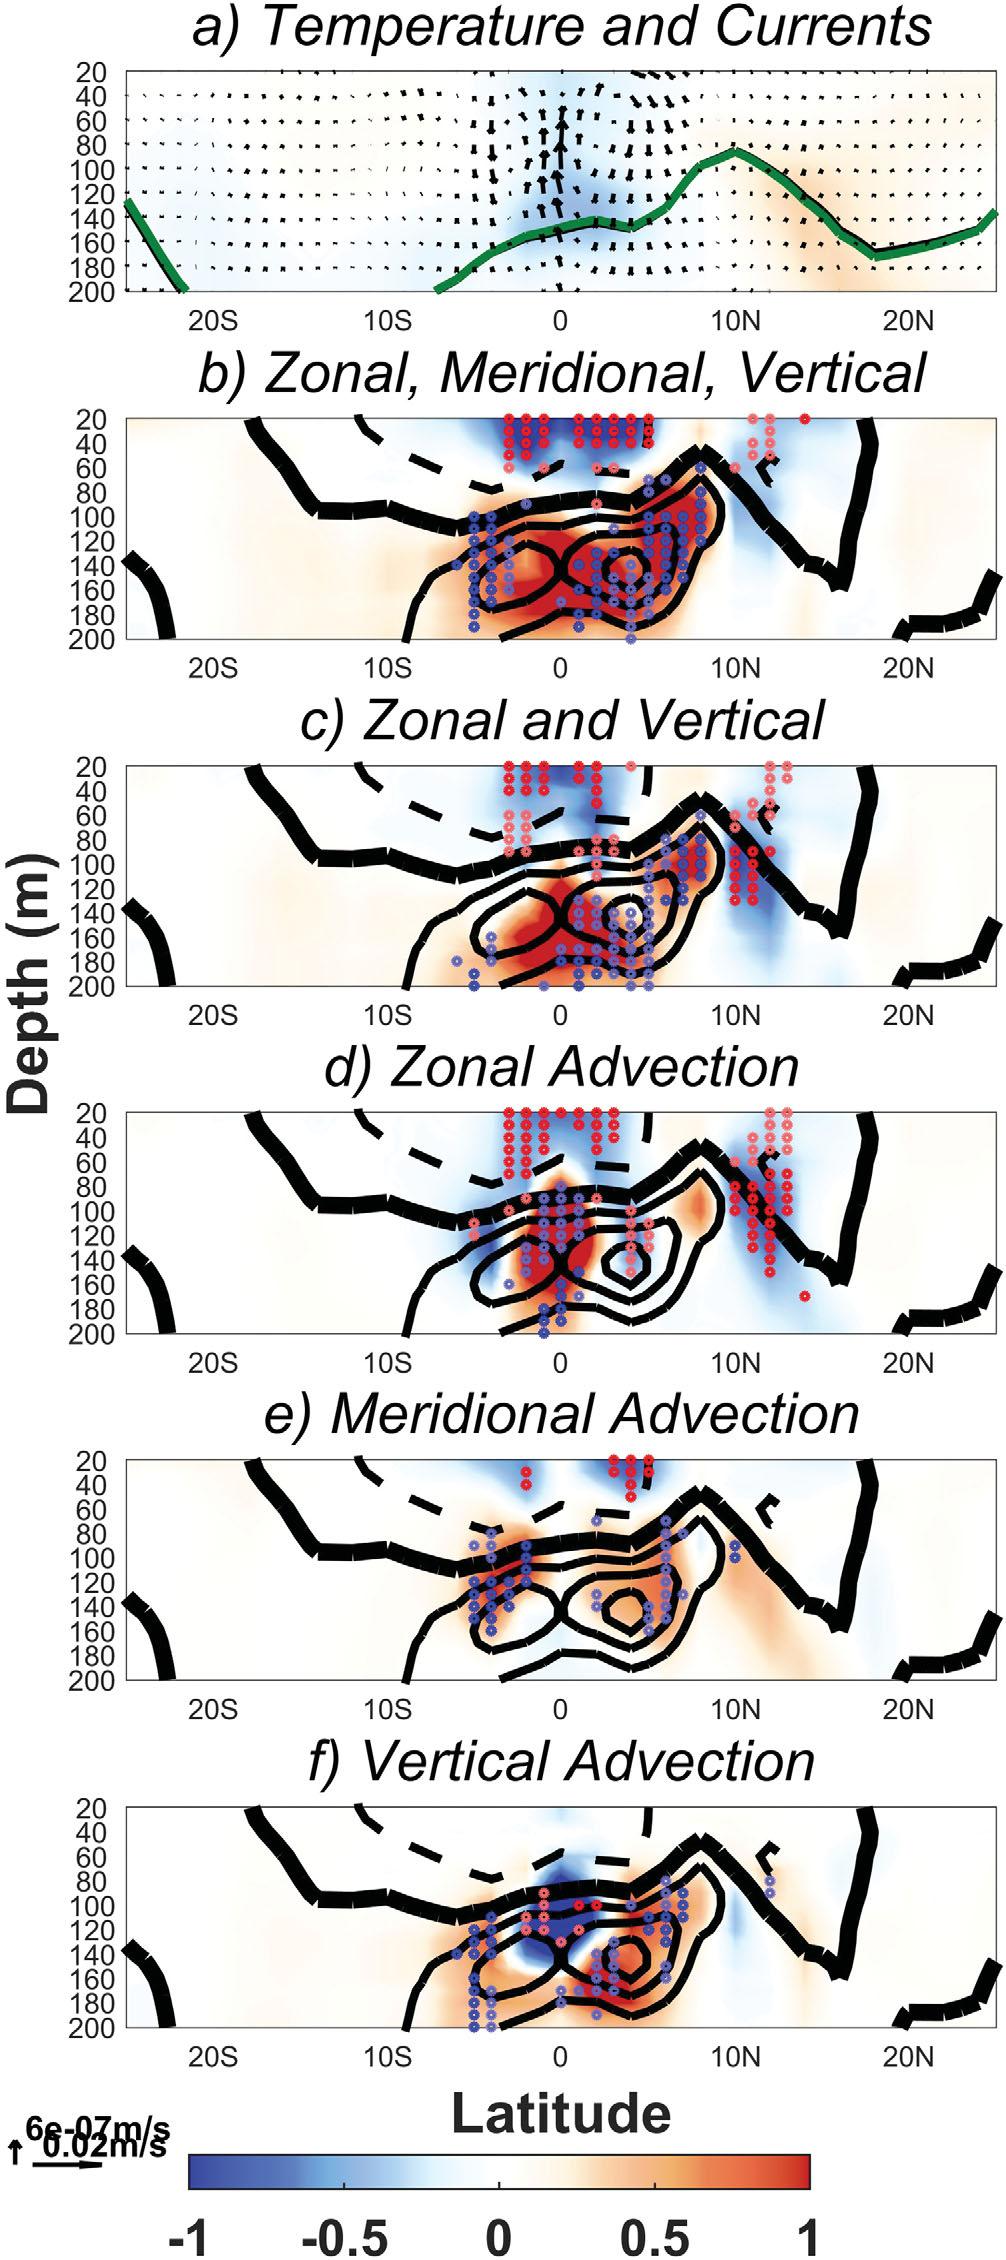 Although the above-described advection processes are generally reproduced by the five assimilation products, there are still substantial differences in their magnitude and spatial extent at this